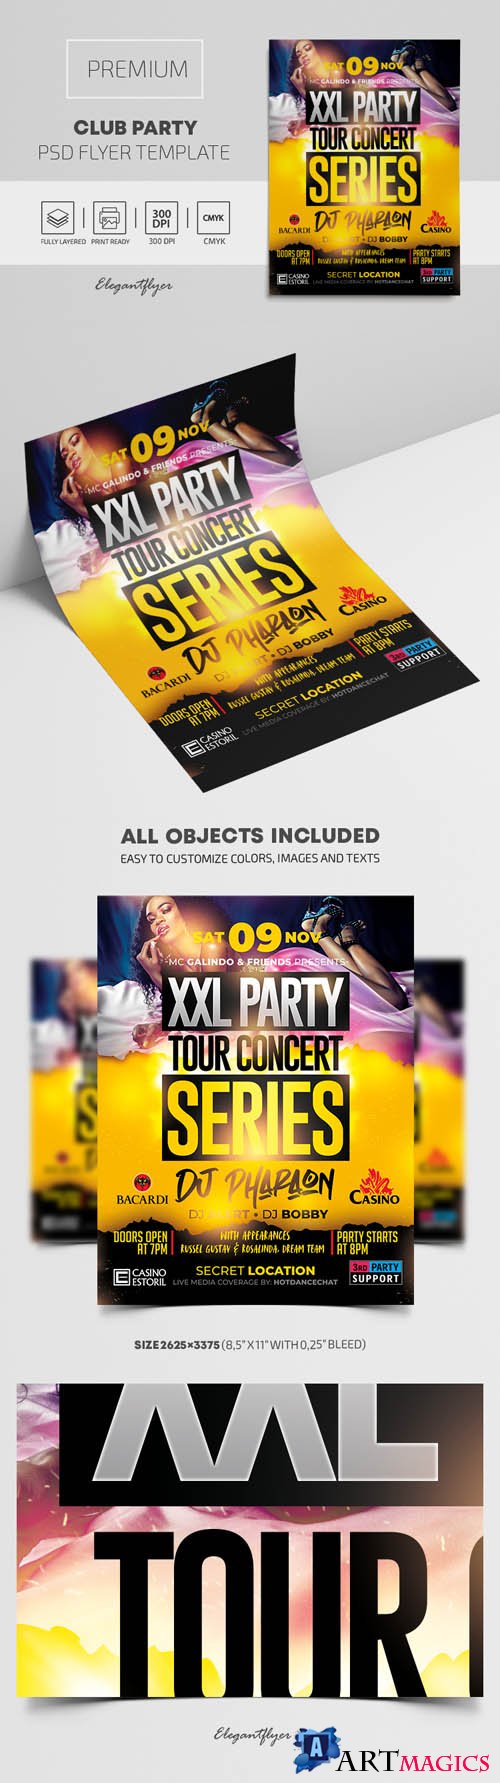 Club Party Premium PSD Flyer Template